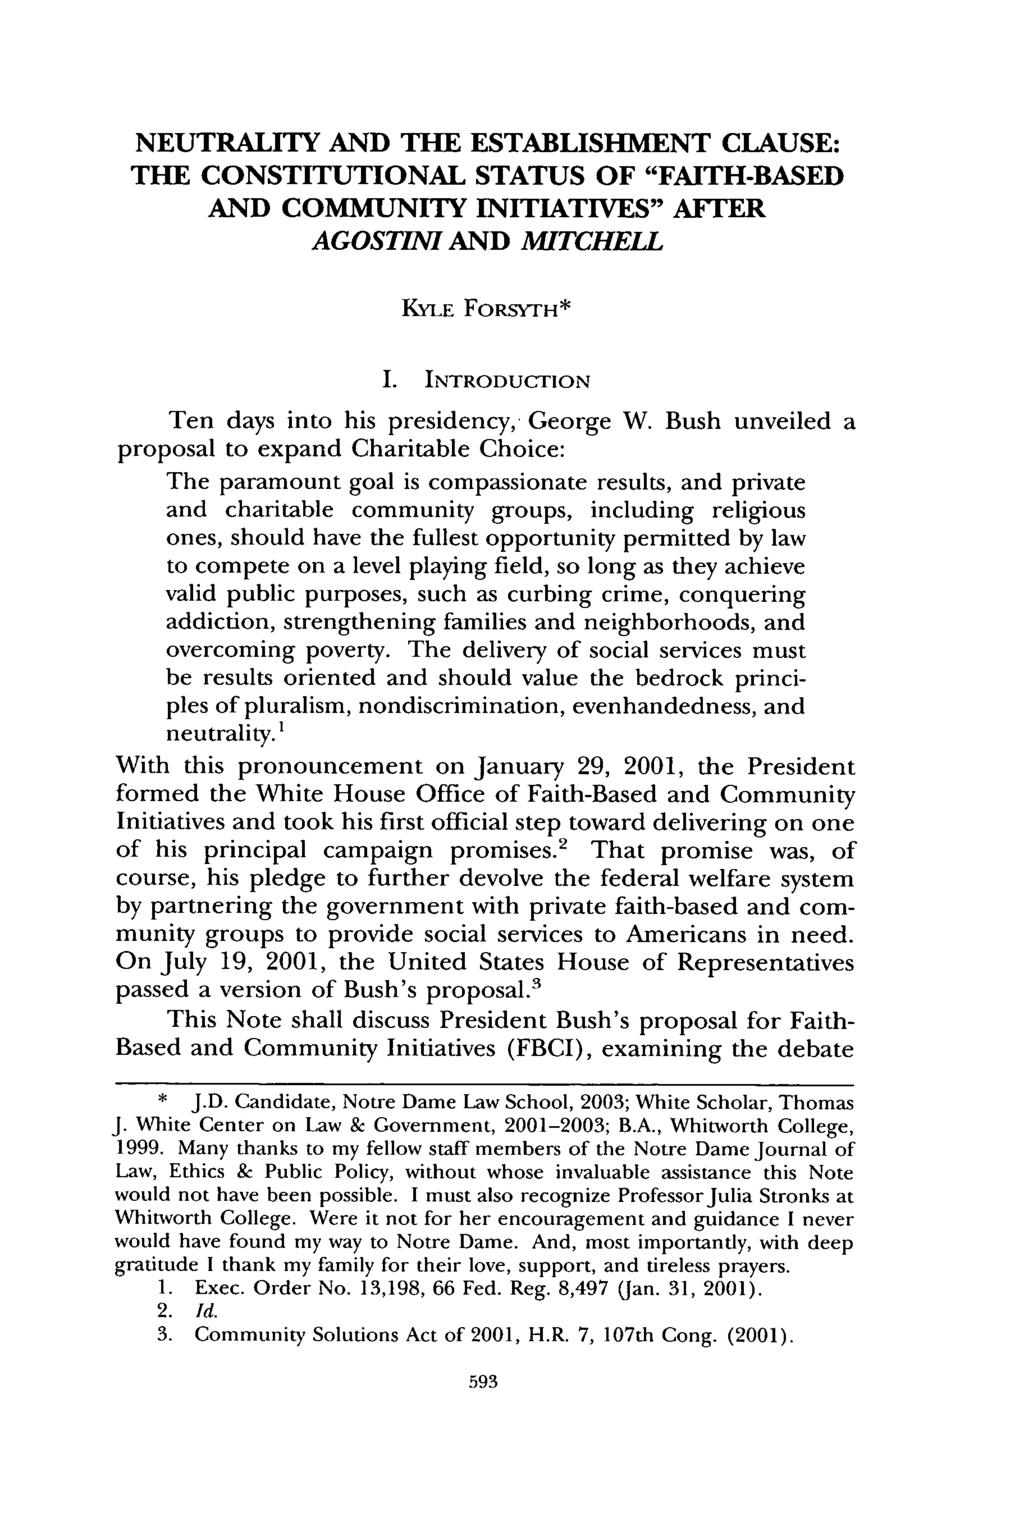 NEUTRALITY AND THE ESTABLISHMENT CLAUSE: THE CONSTITUTIONAL STATUS OF "FAITH-BASED AND COMMUNITY INITIATIVES" AFTER AGOSTINI AND MITCHELL KYLE FoRSYTH* I.